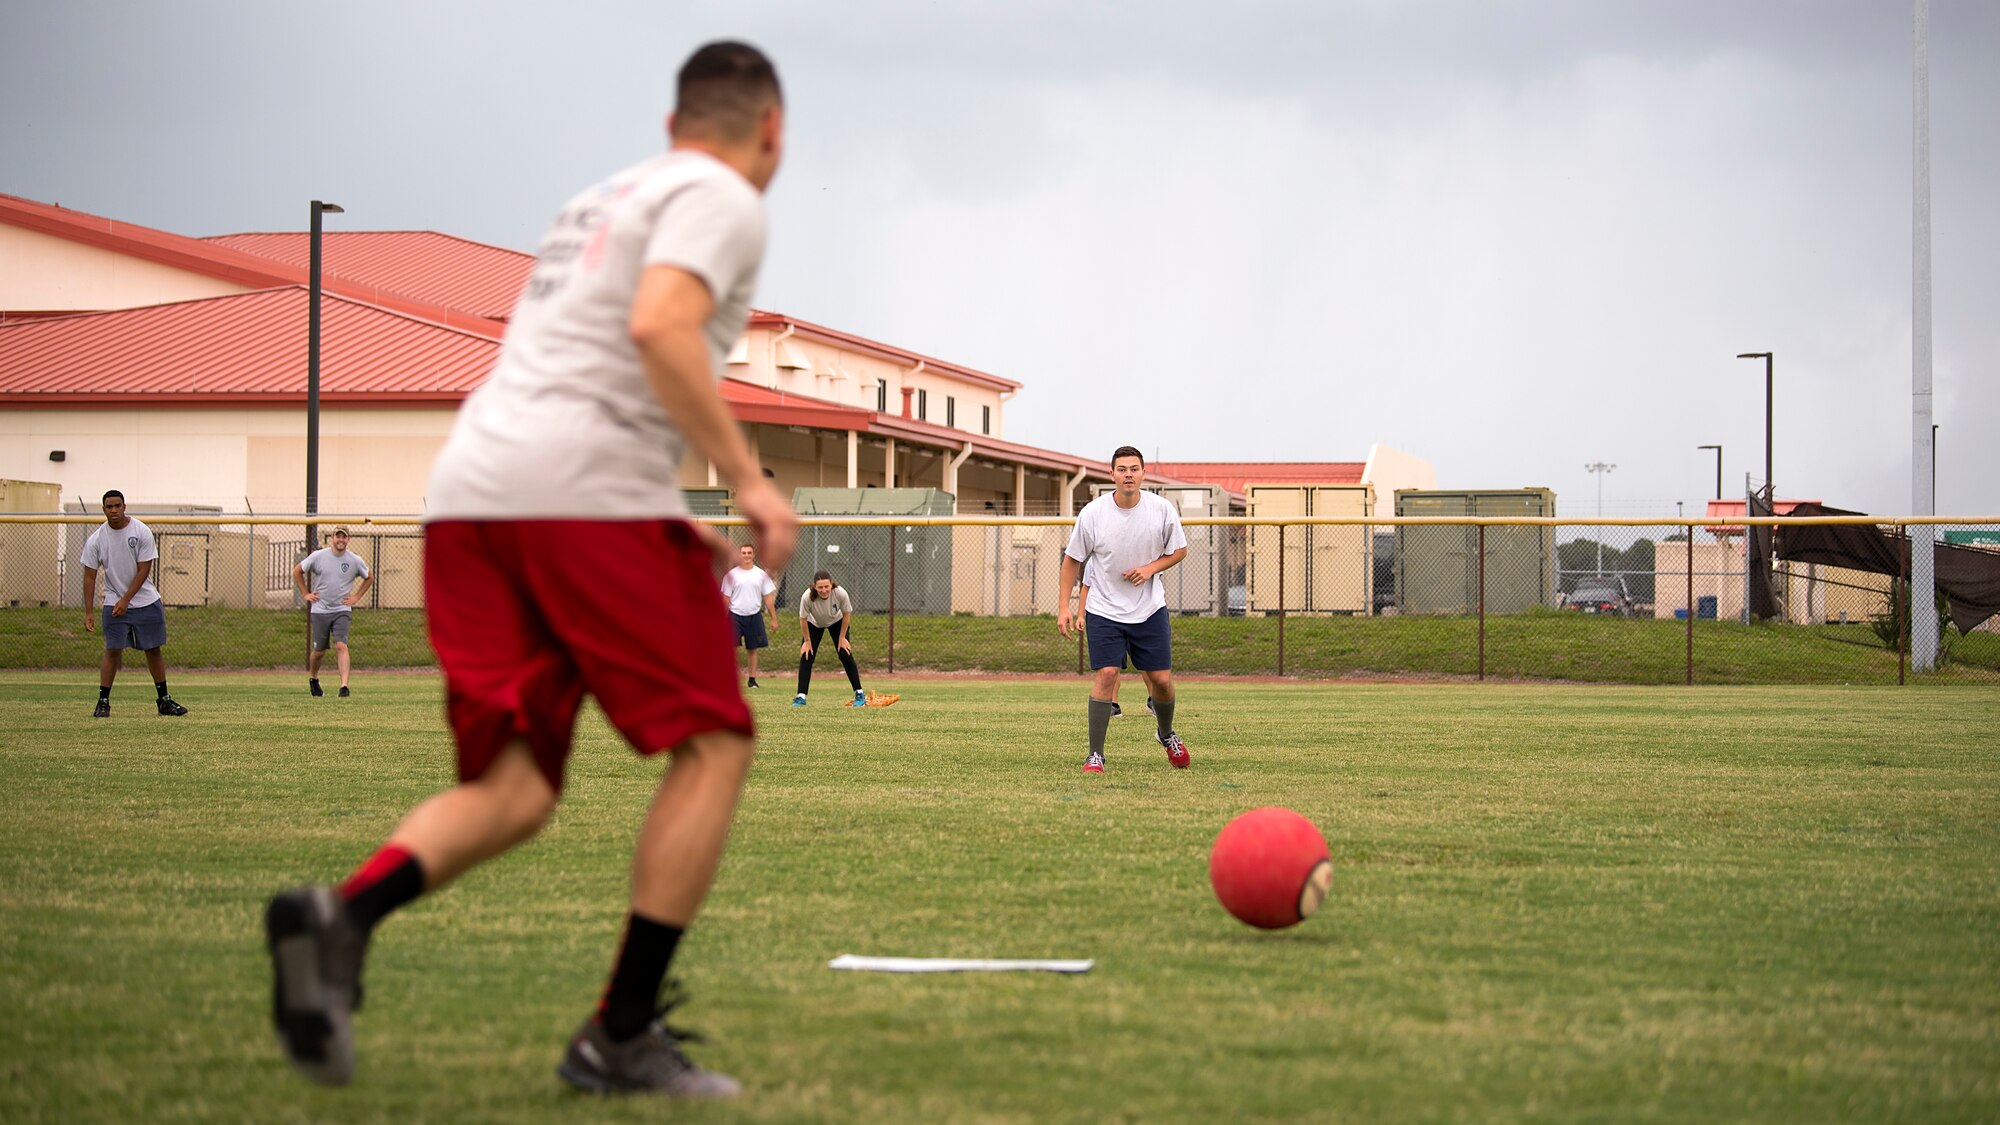 A member of the 6th Security Forces Squadron prepares to kick a ball during a Battle of the Badges kickball game against the fire department at MacDill Air Force Base, Fla., May 22, 2018. This year’s recognition of Police Week consisted of a variety of events that included a remembrance ceremony, a 24-hour vigilance run and a kickball game.